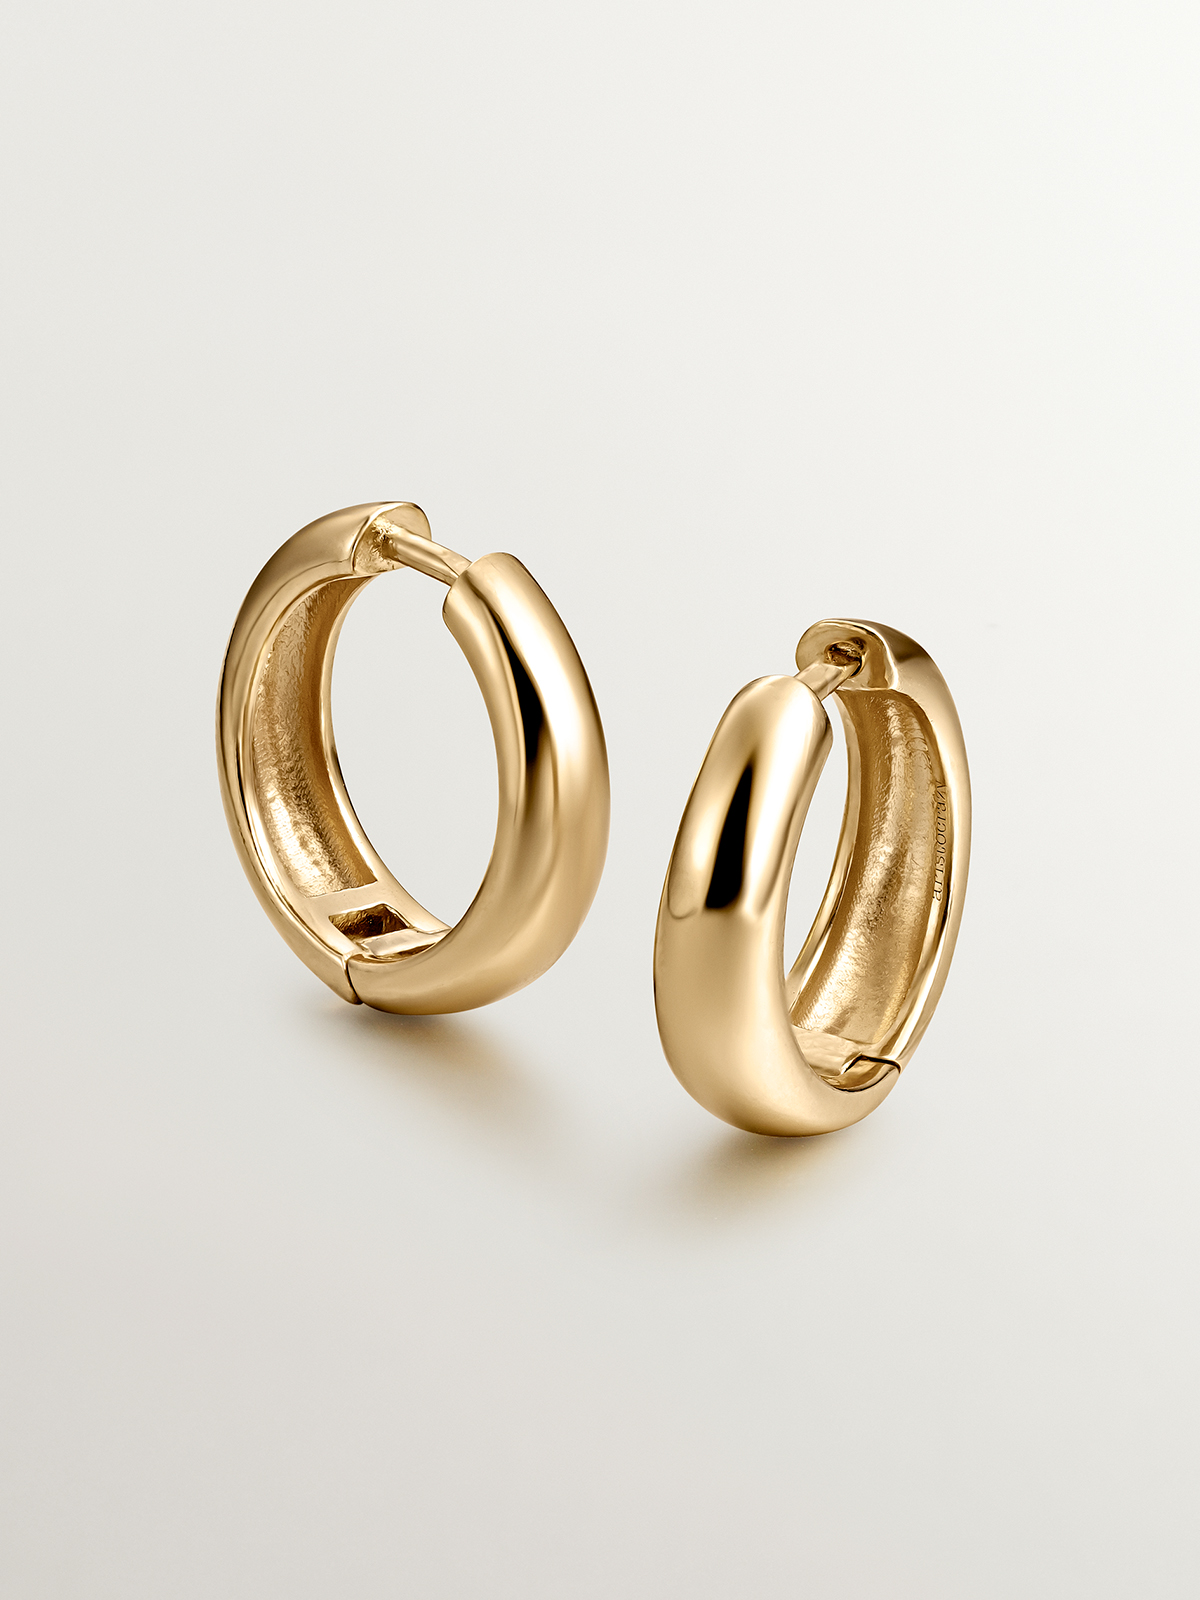 Medium thick hoop earrings made of 925 silver coated in 18K yellow gold.